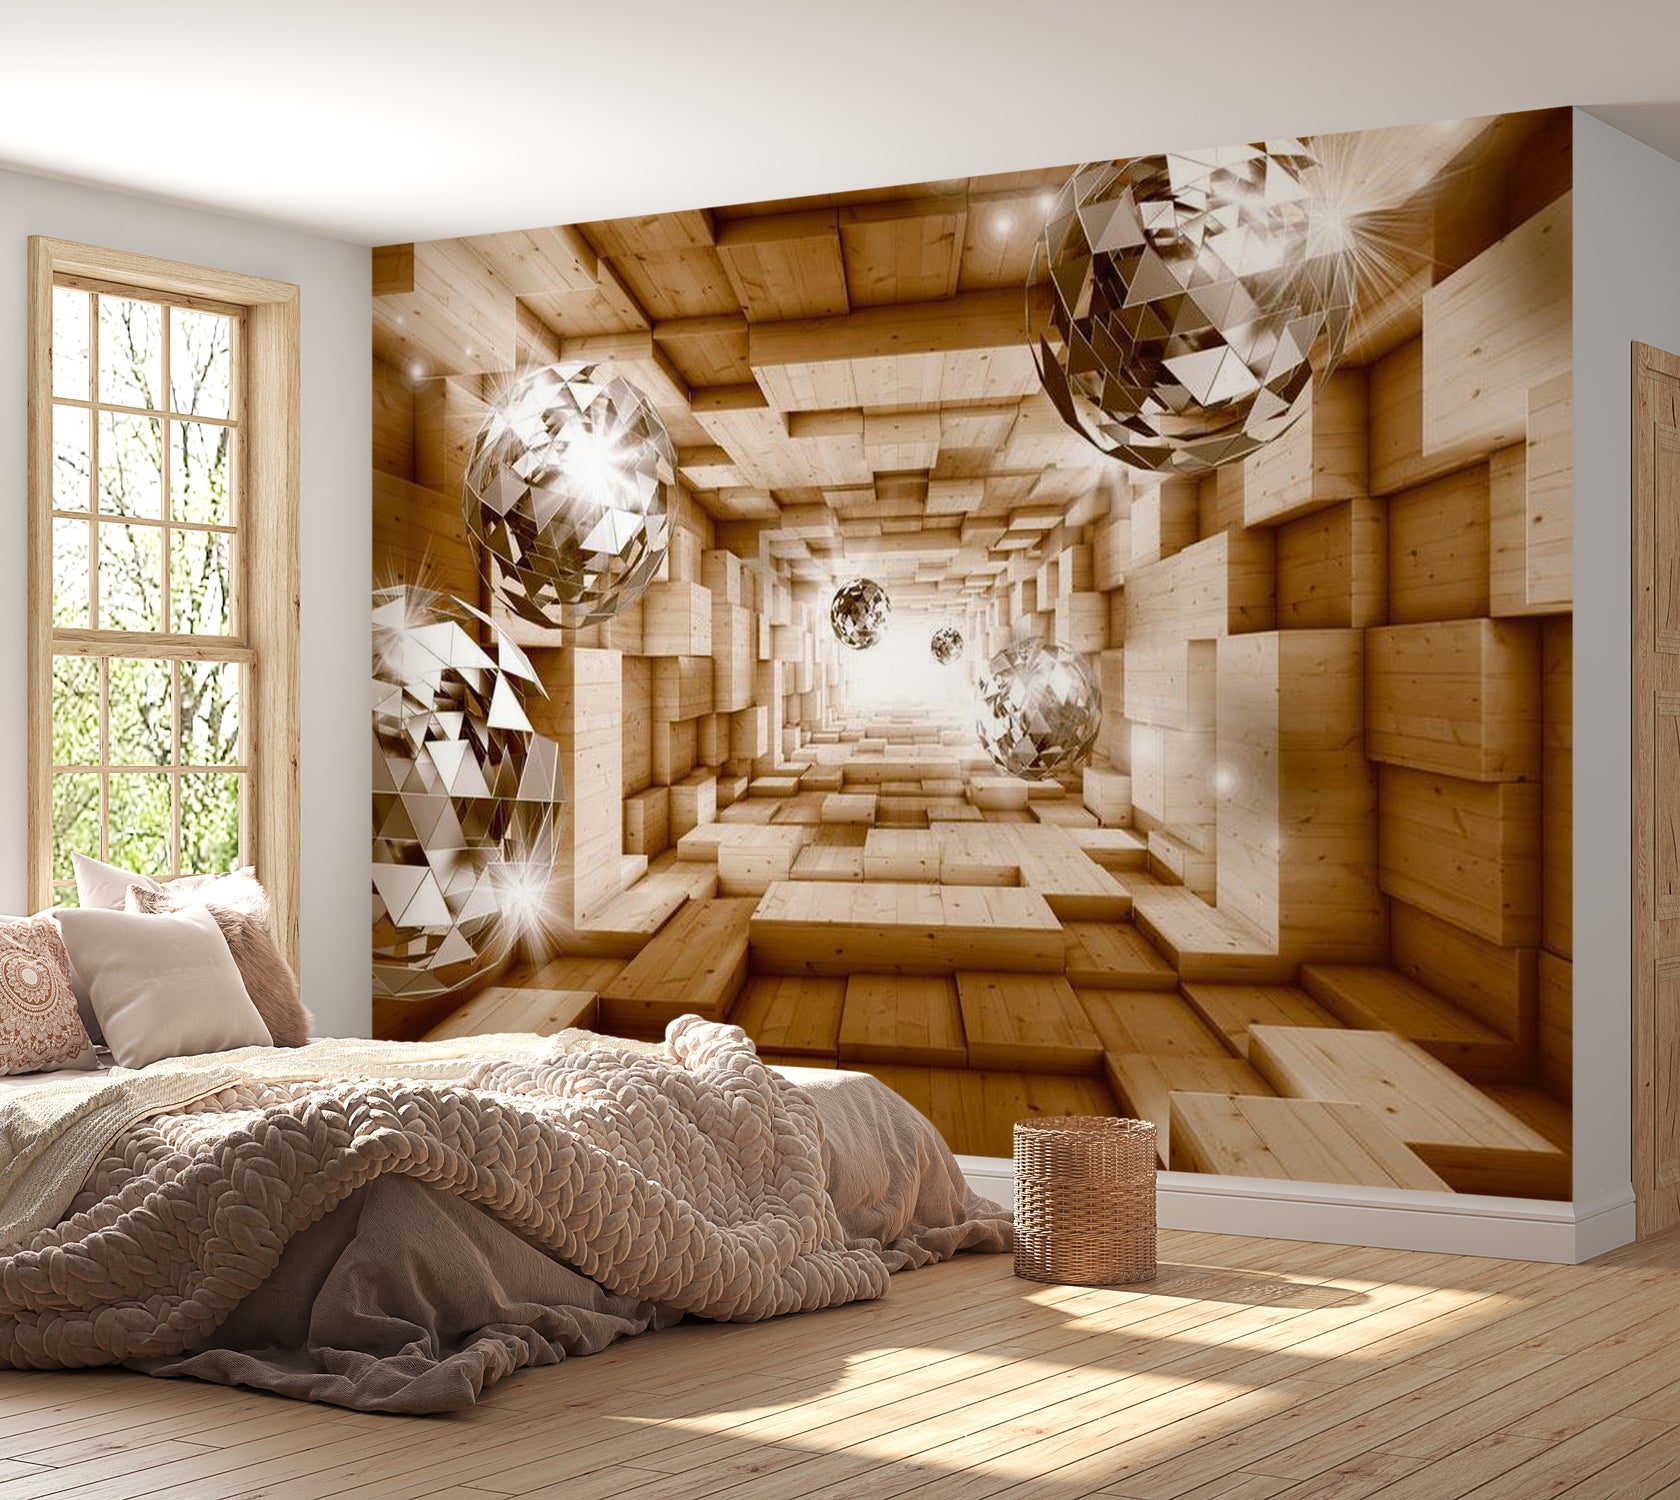 Peel & Stick 3D Illusion Wall Mural - The Road To The Light - Removable Wall Decals